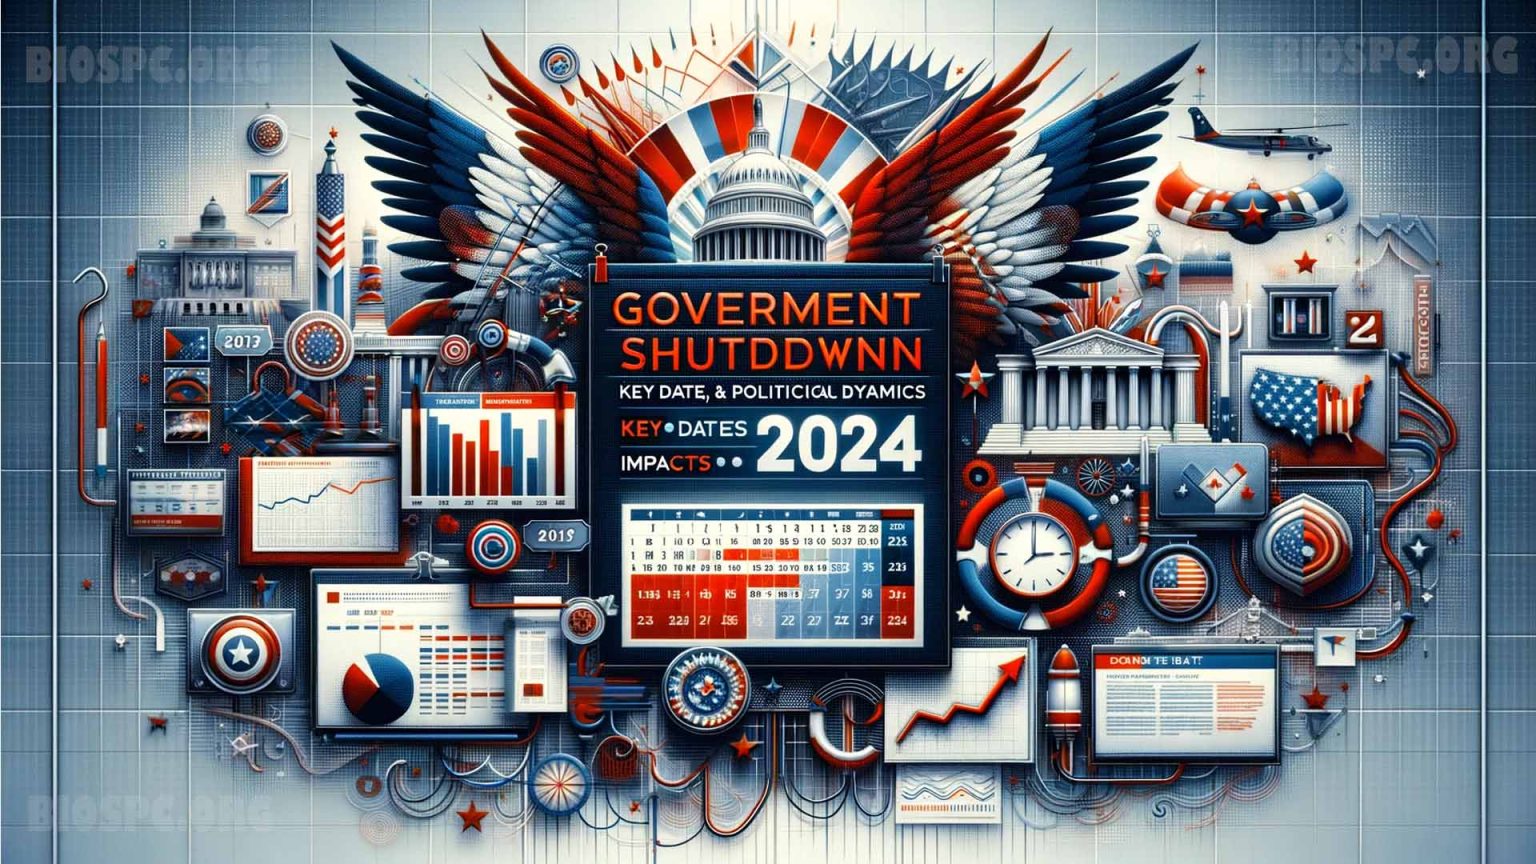 Government Shutdown 2024 Key Dates, Impacts, and Political Dynamics?